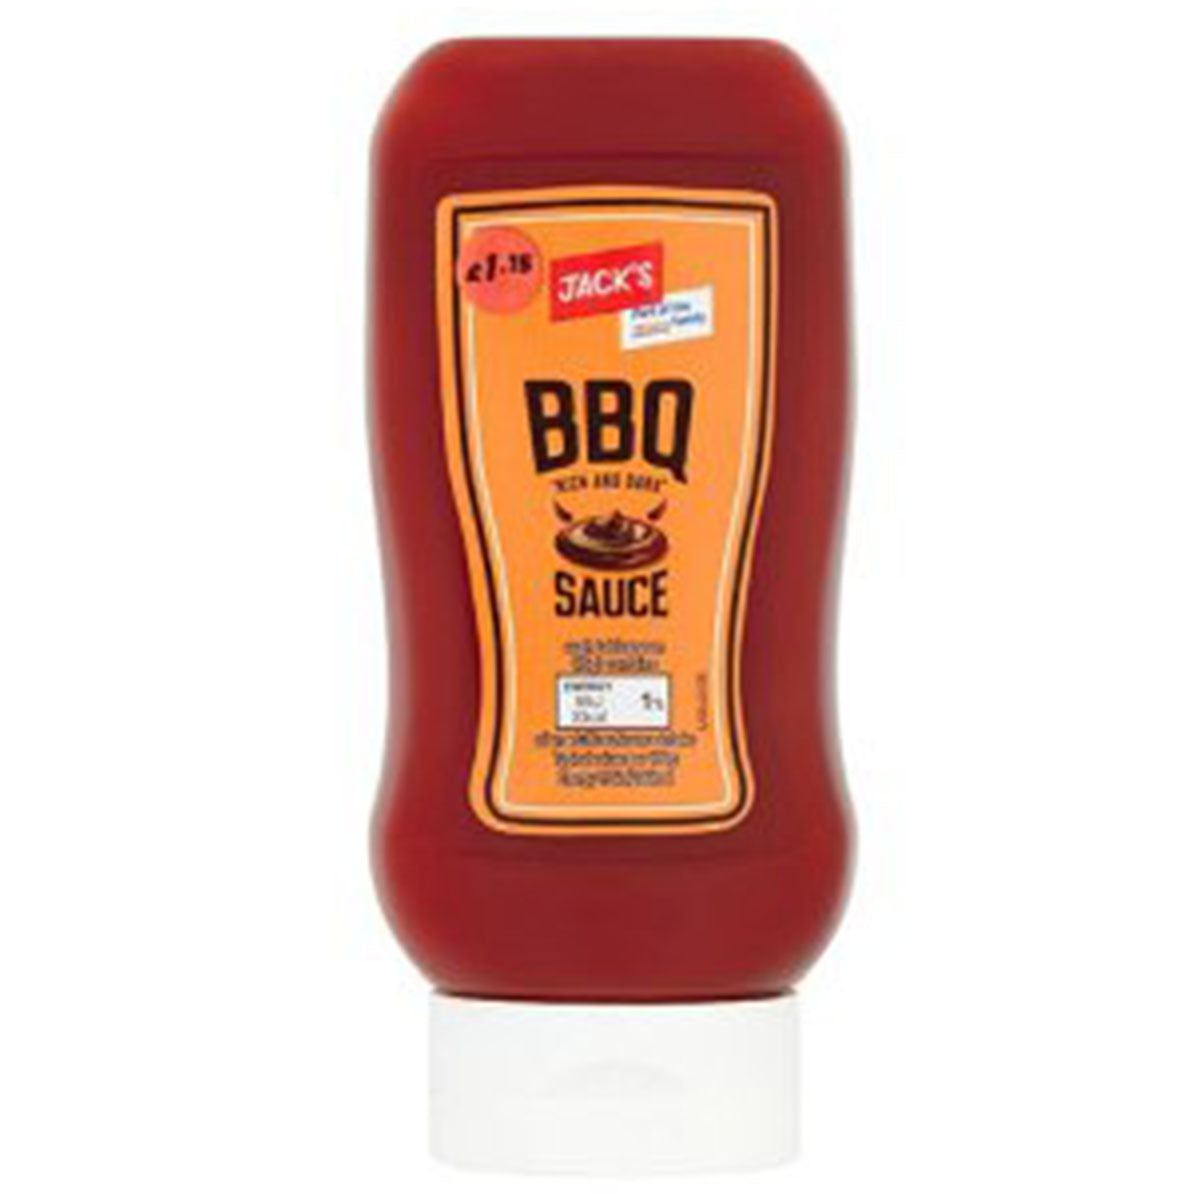 Jack’s - BBQ Sauce - Continental Food Store